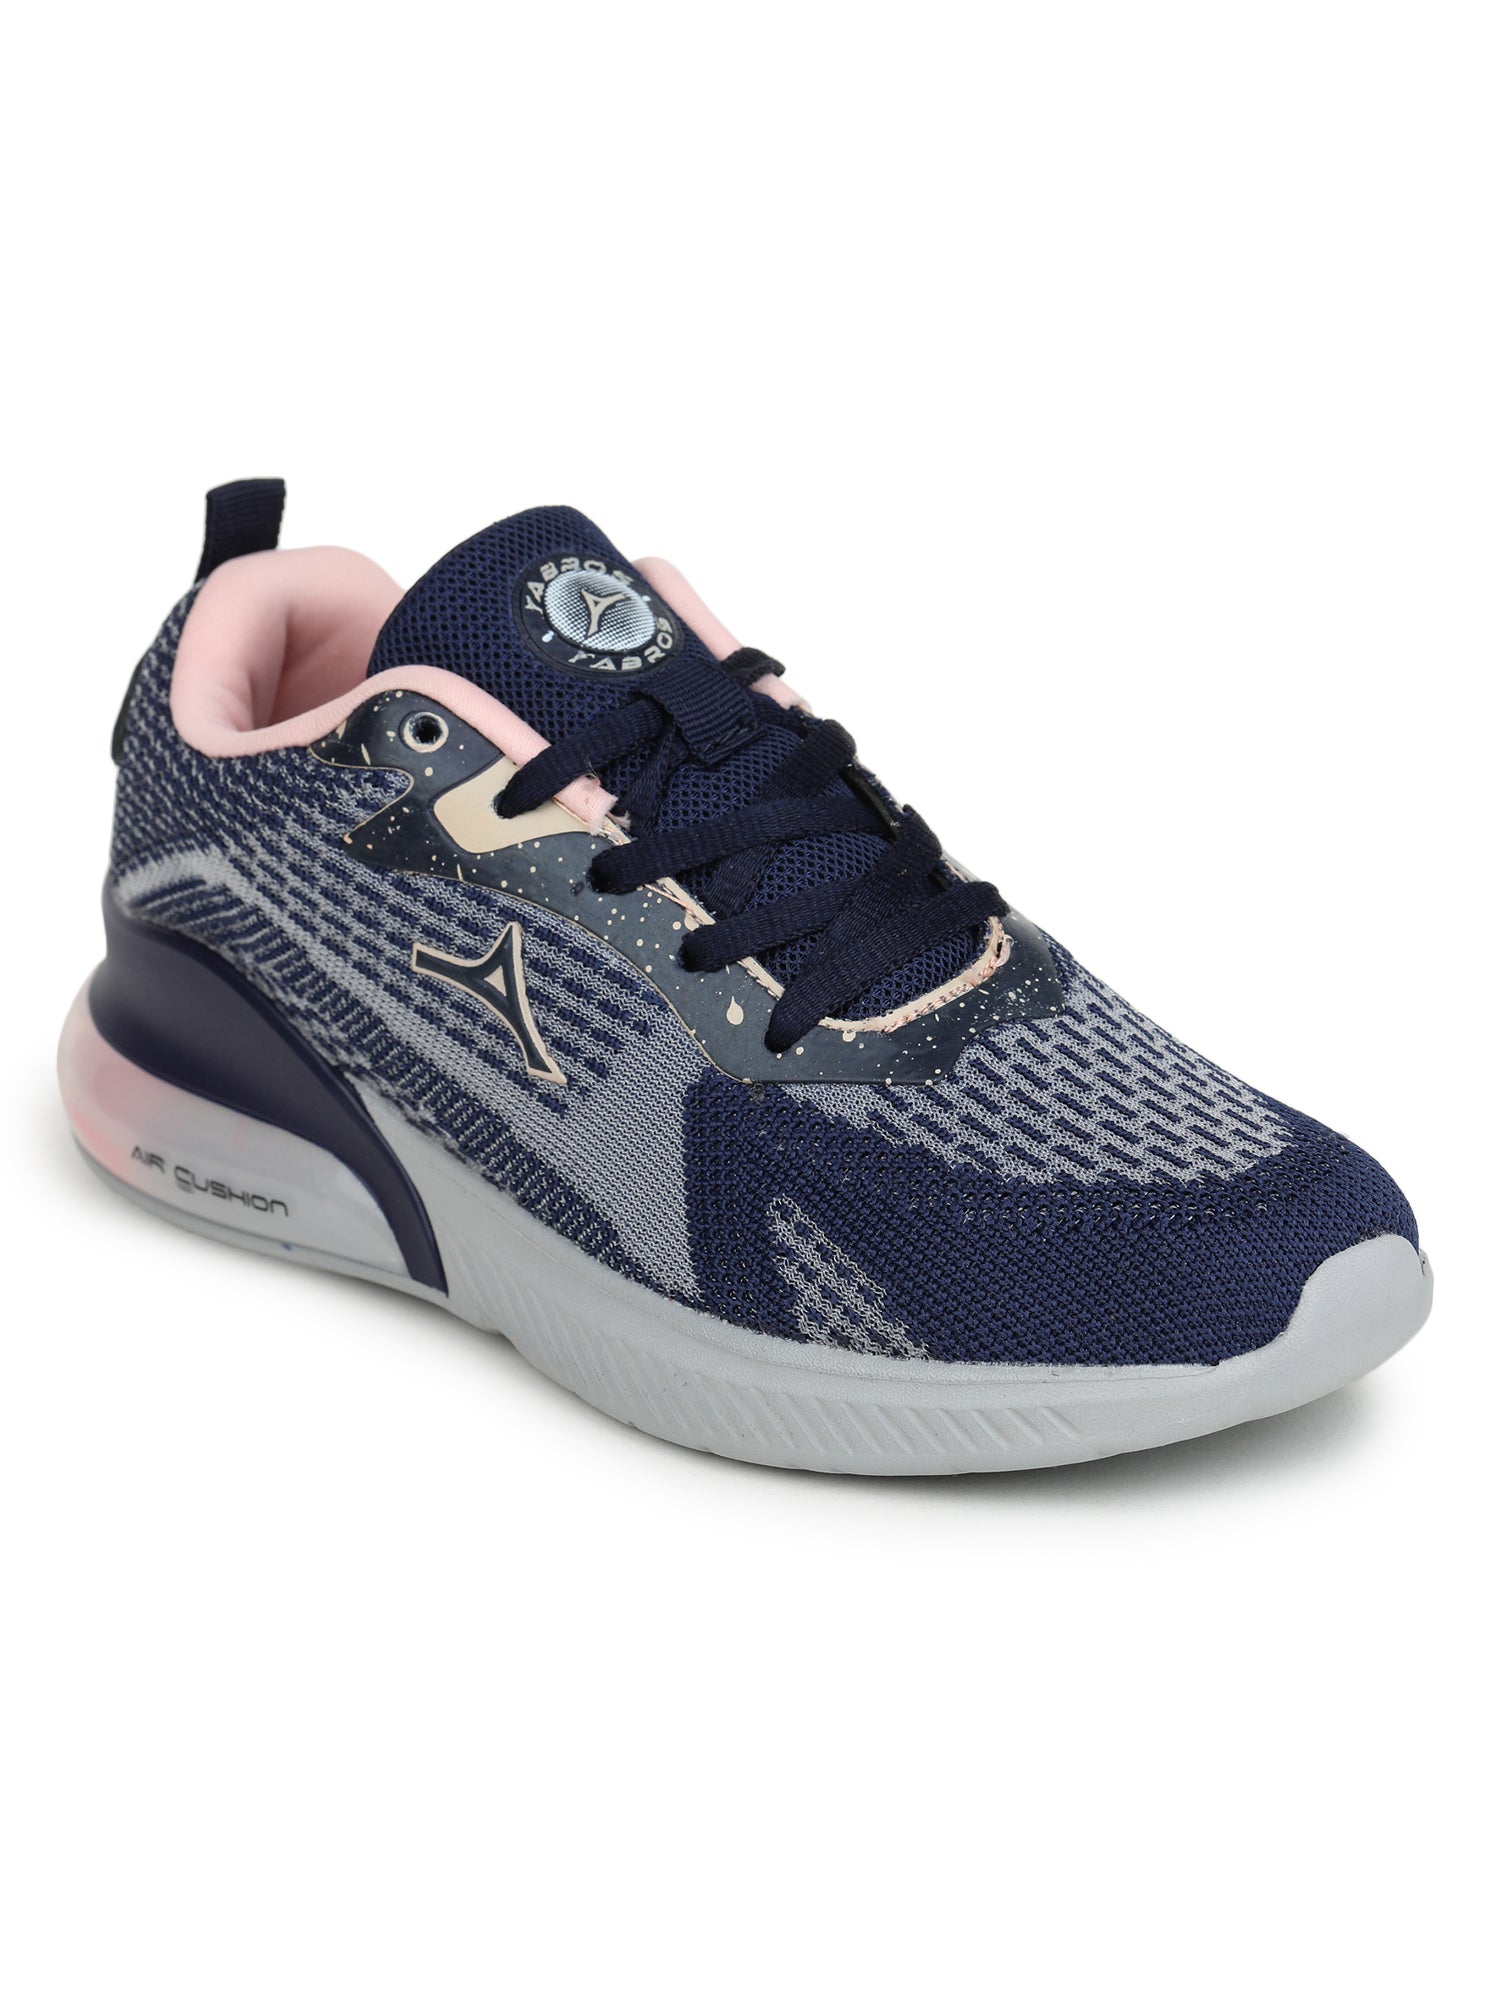 ABROS MARIGOLD SPORTS SHOES FOR WOMEN